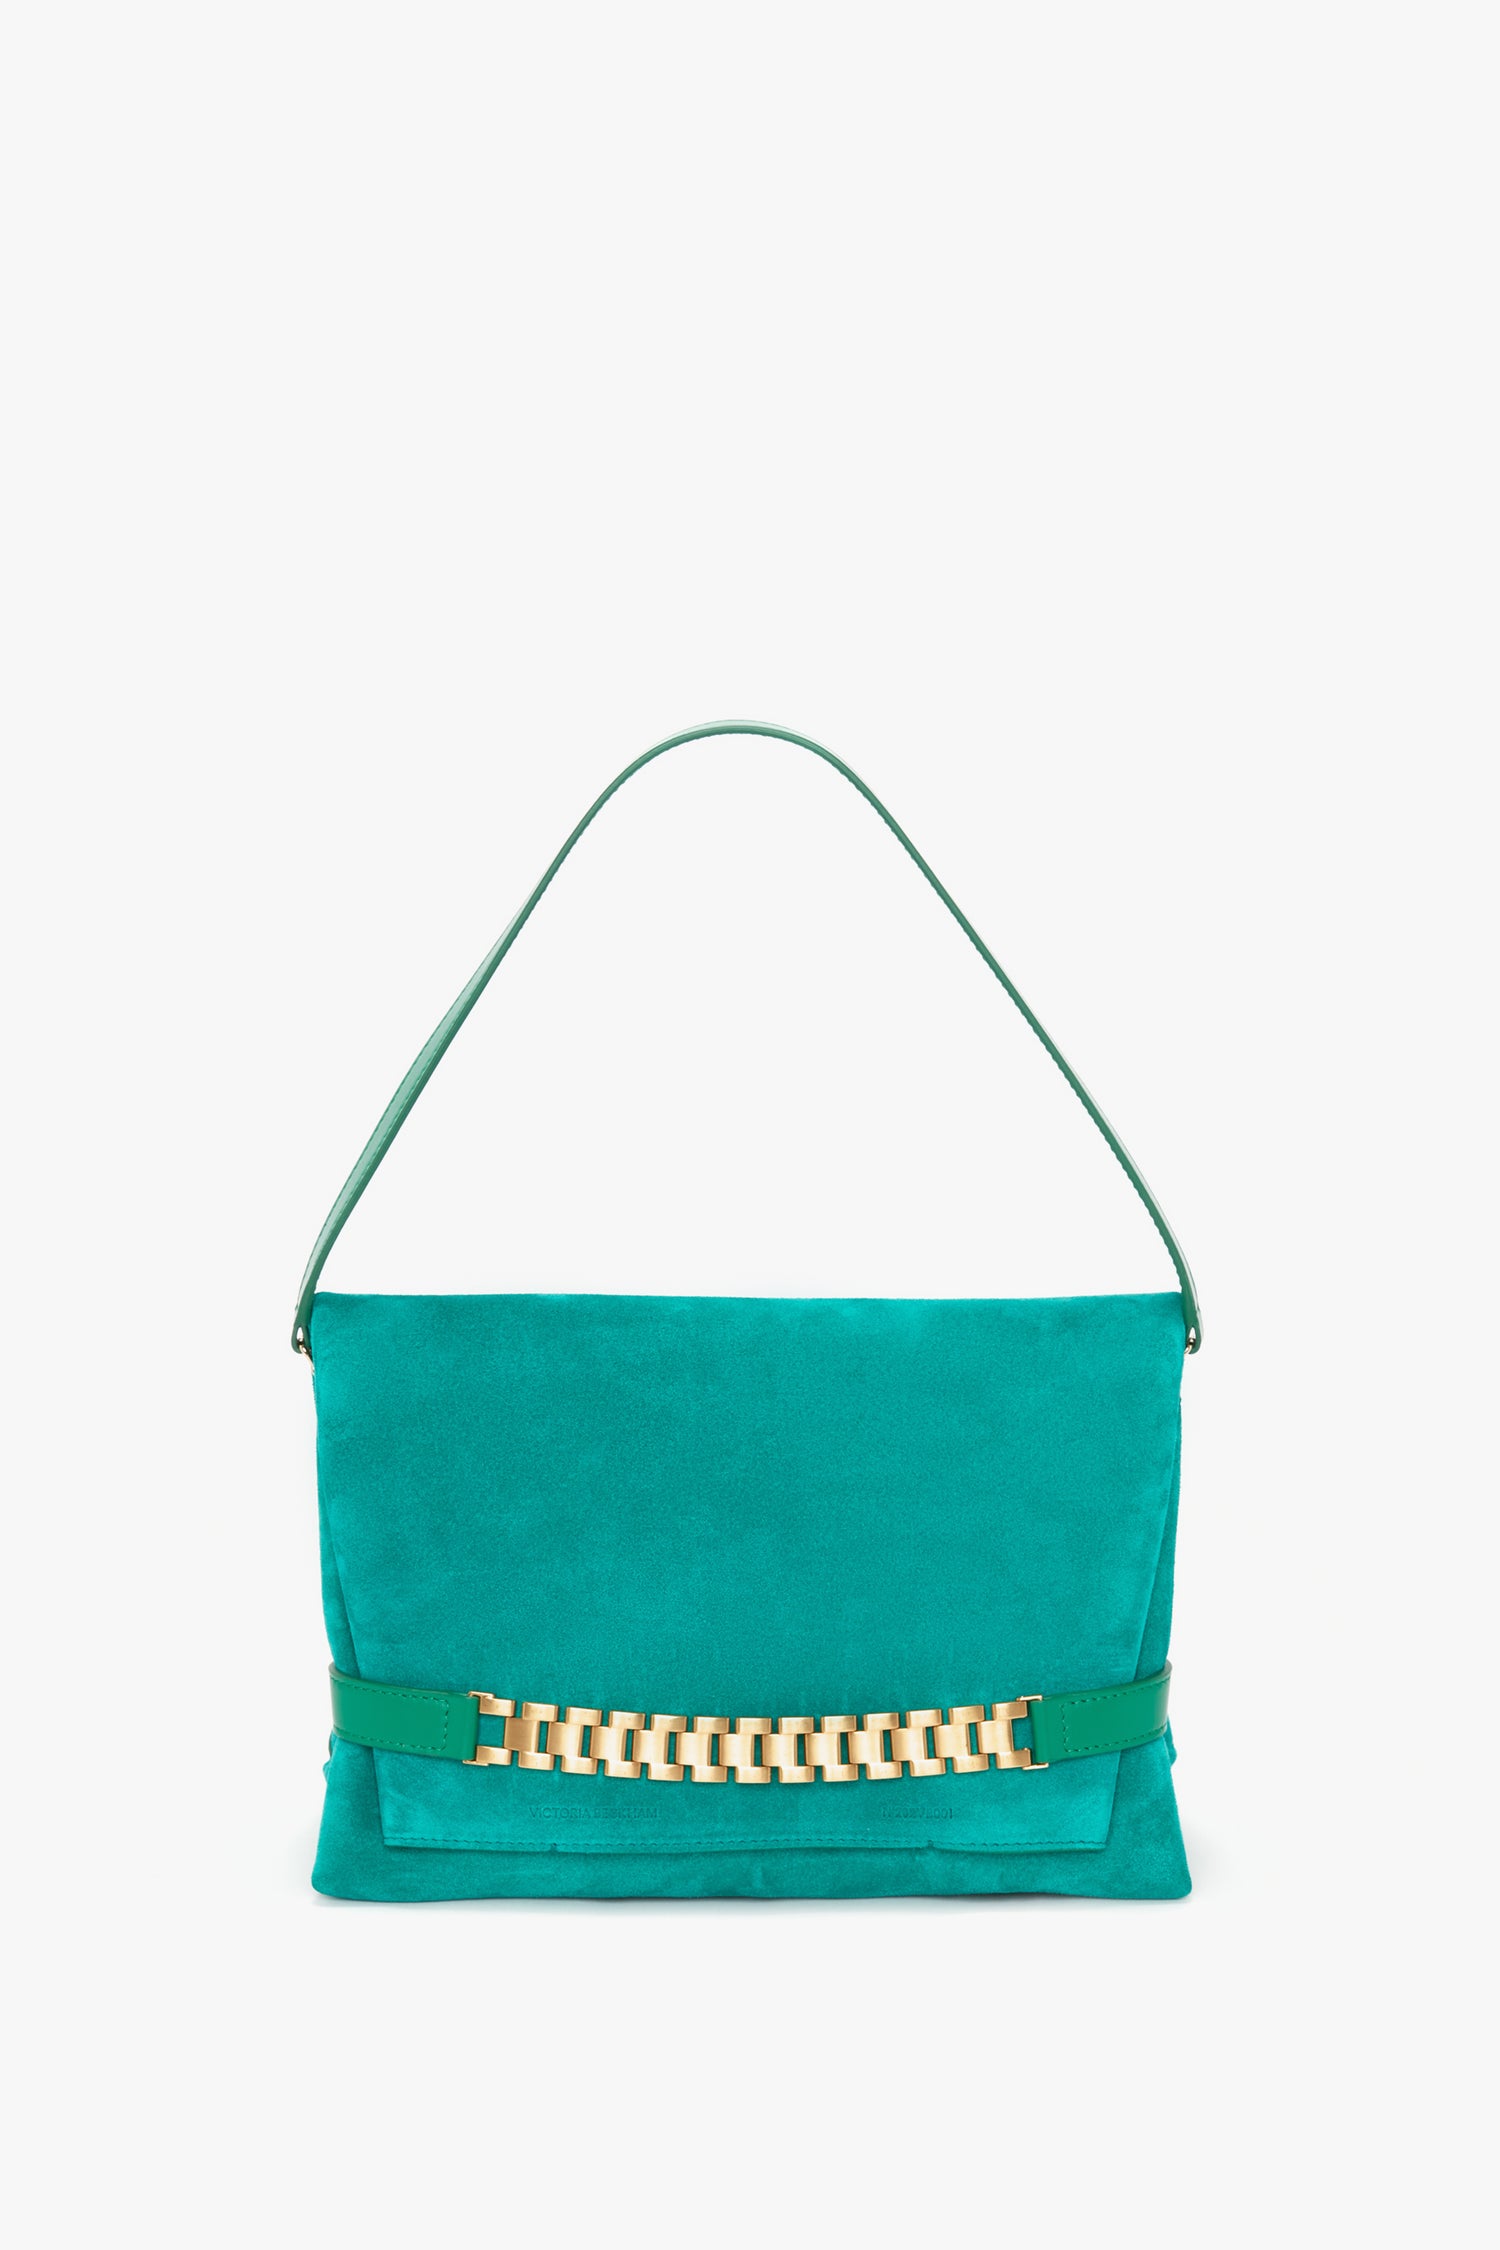 Victoria Beckham Chain Pouch Bag with Strap in Malachite Suede